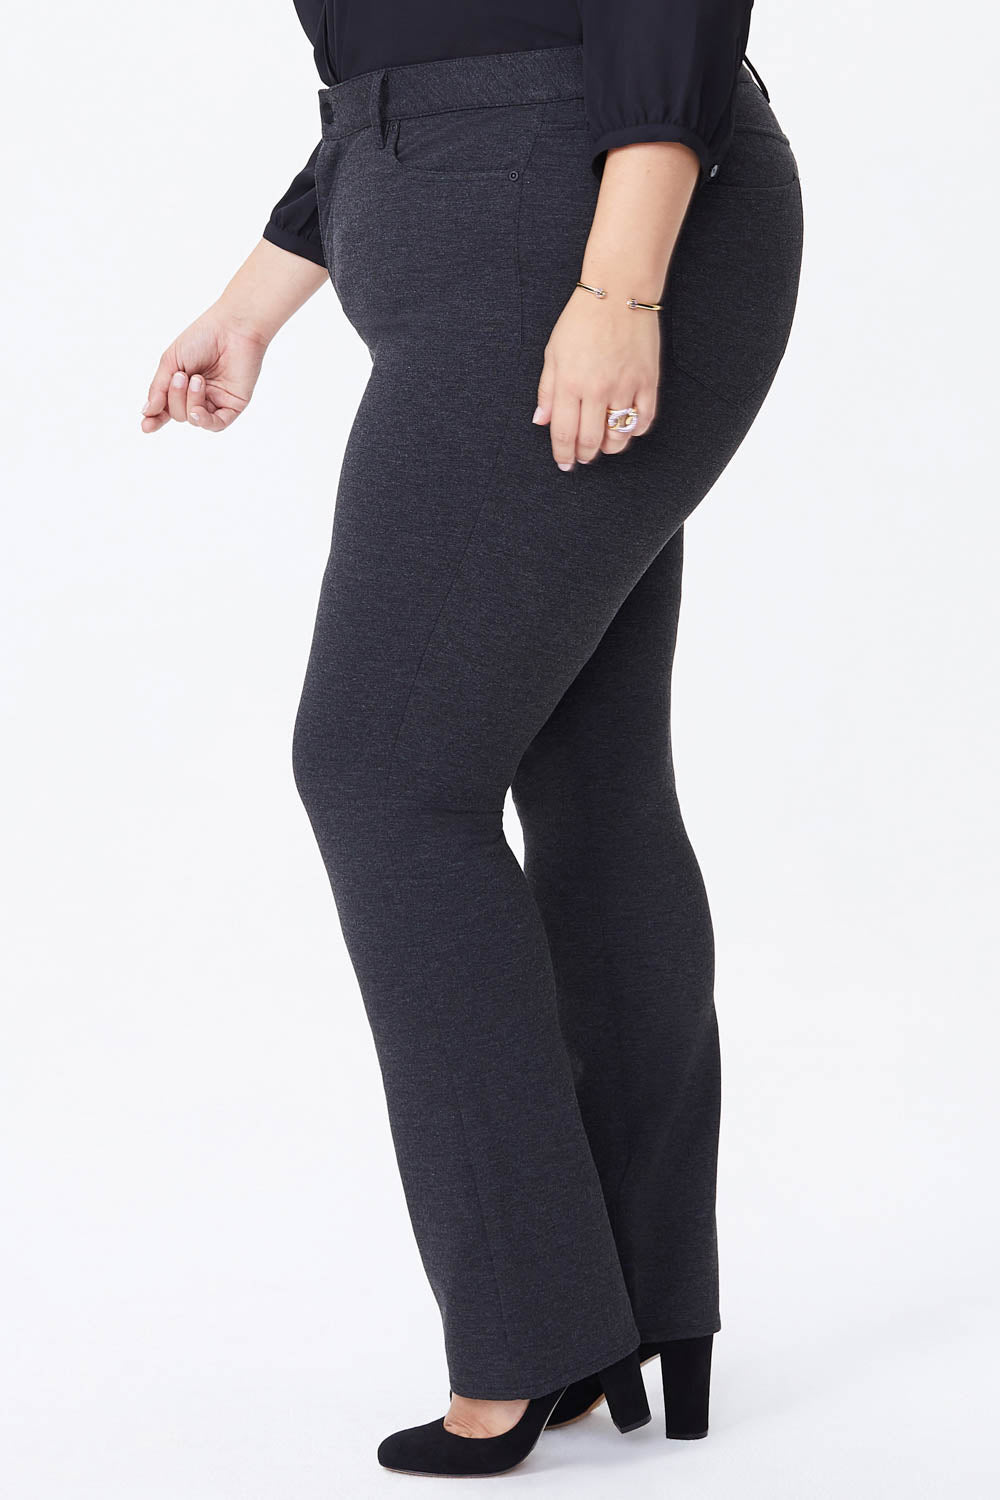 Slim Trouser Pants In Plus Size In Ponte Knit - Charcoal Heathered Grey |  NYDJ